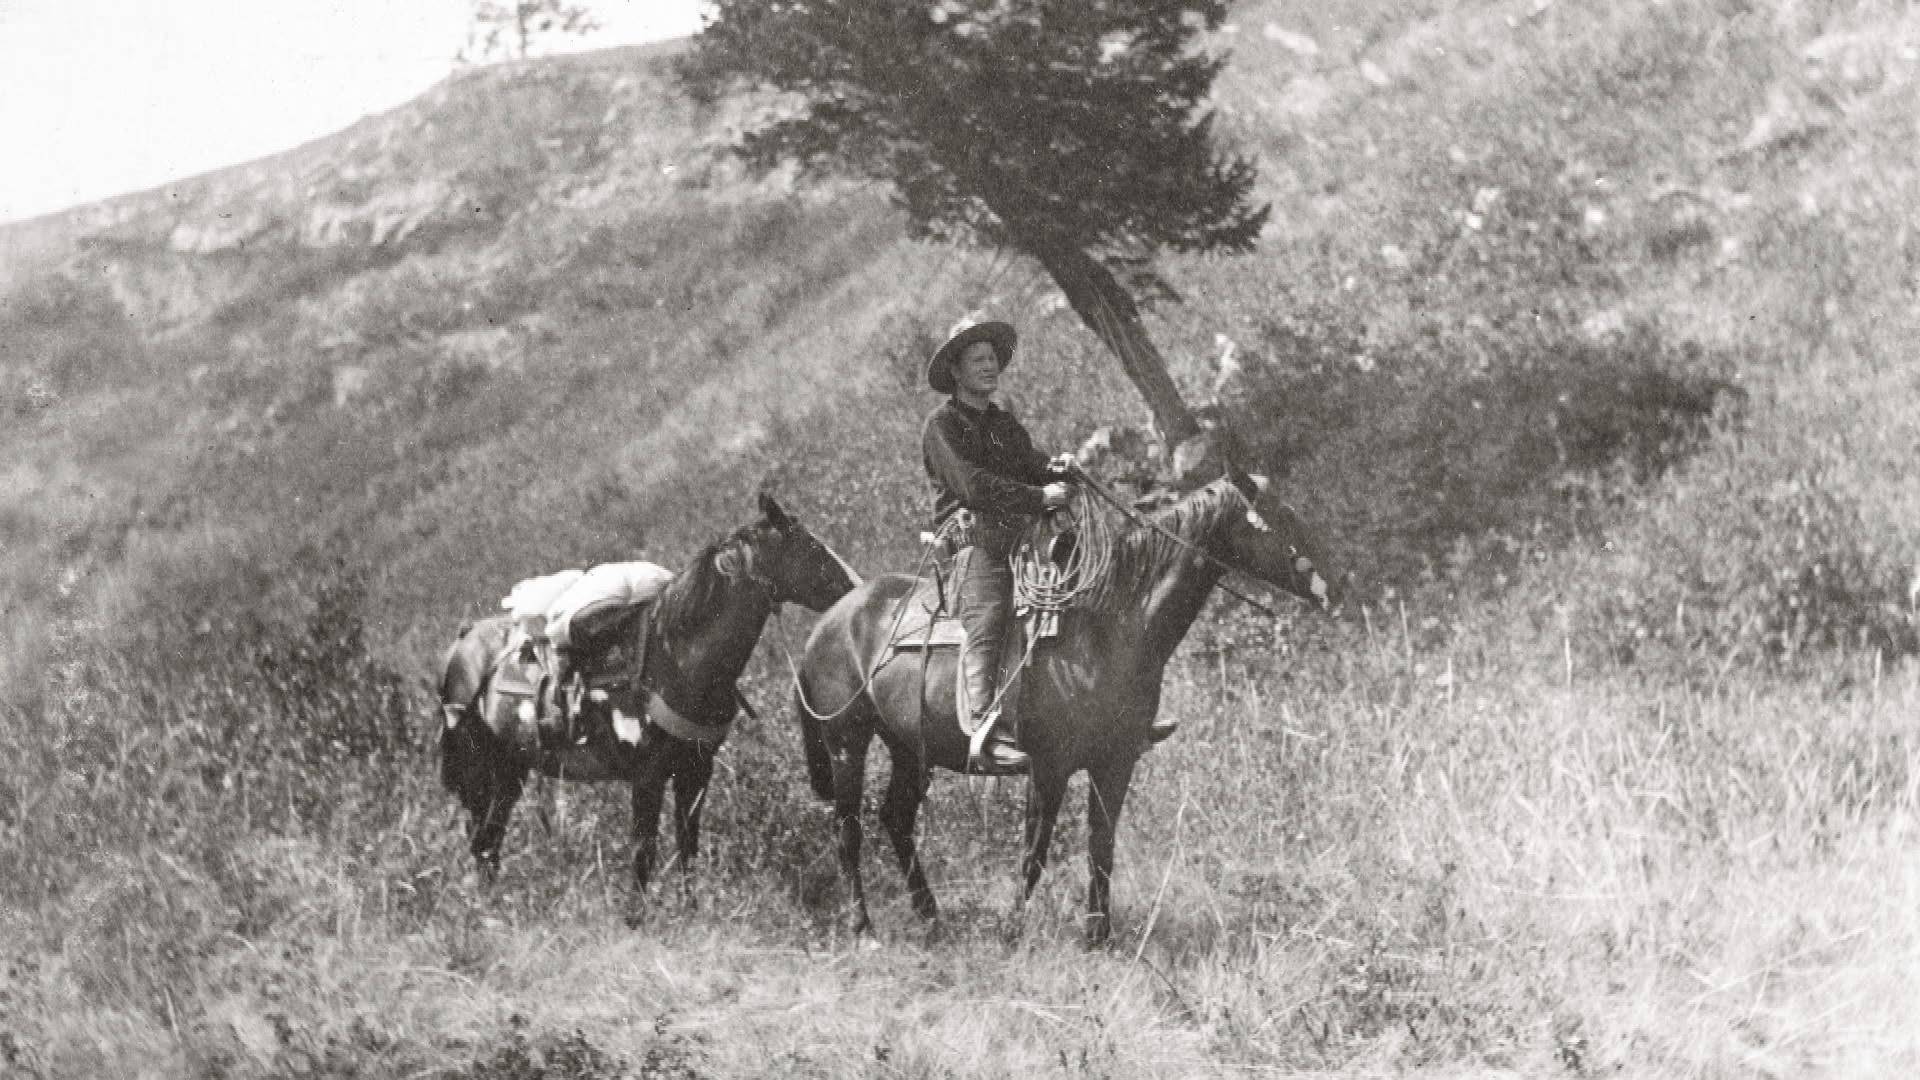 Image of Charlie Russell with two horses.